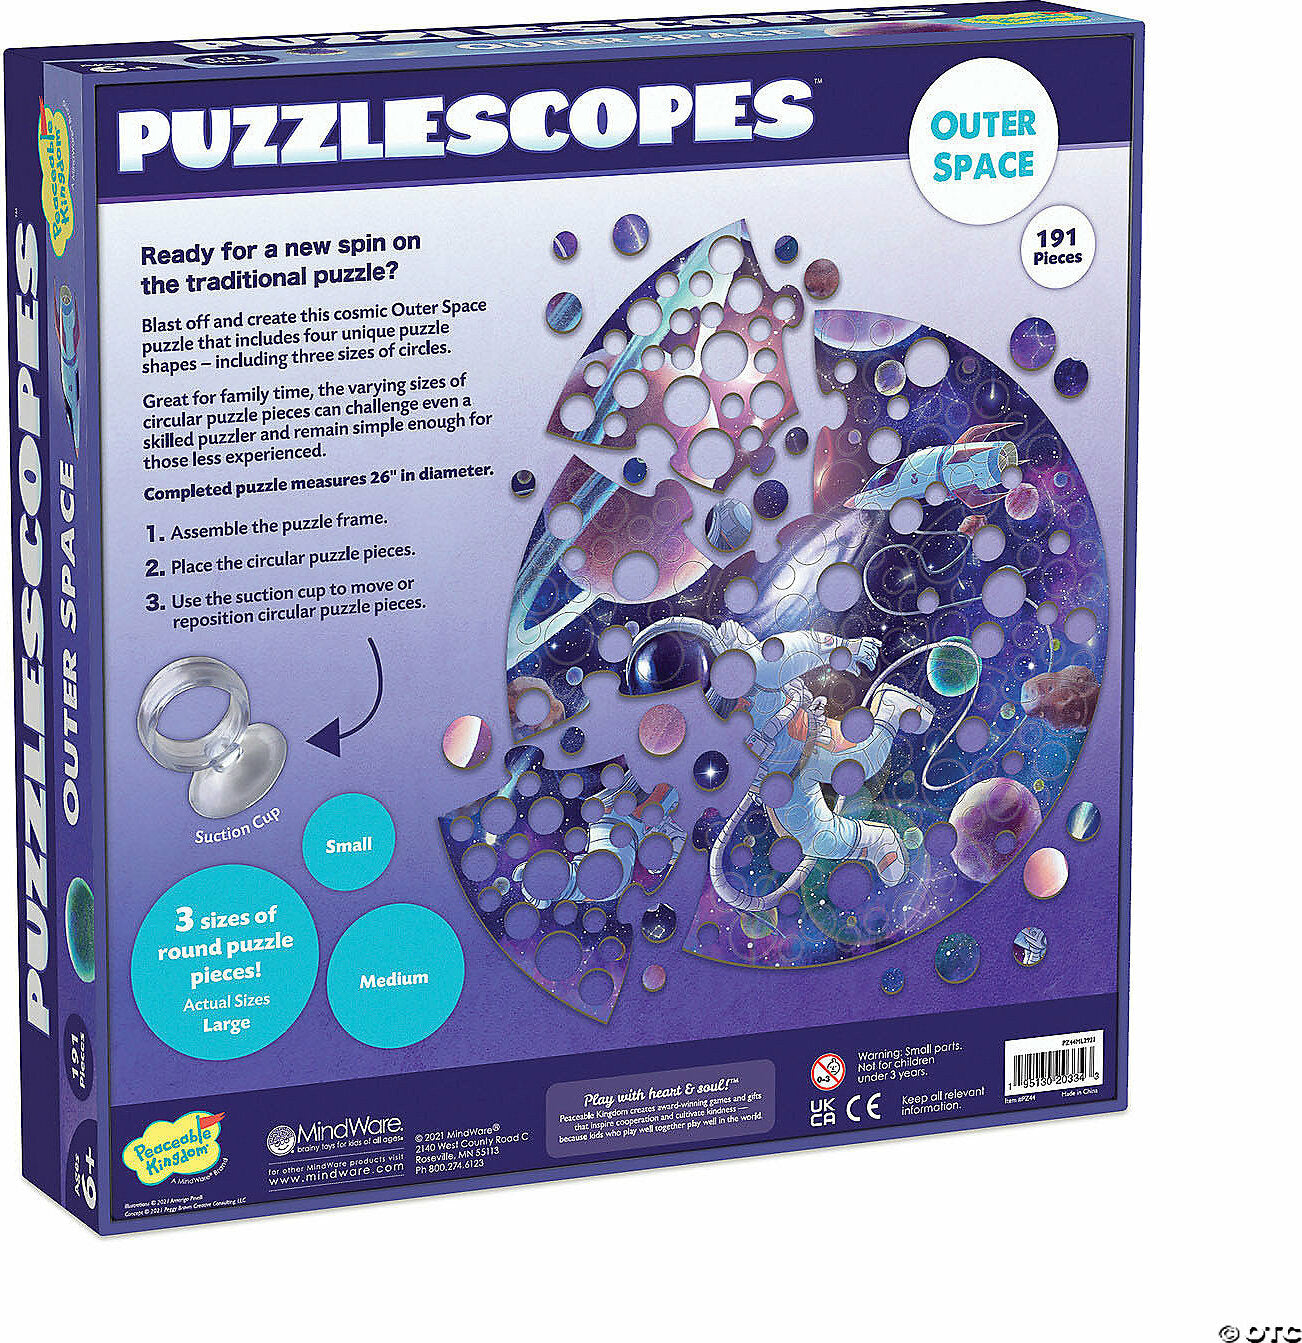 Puzzlescope Outer Space